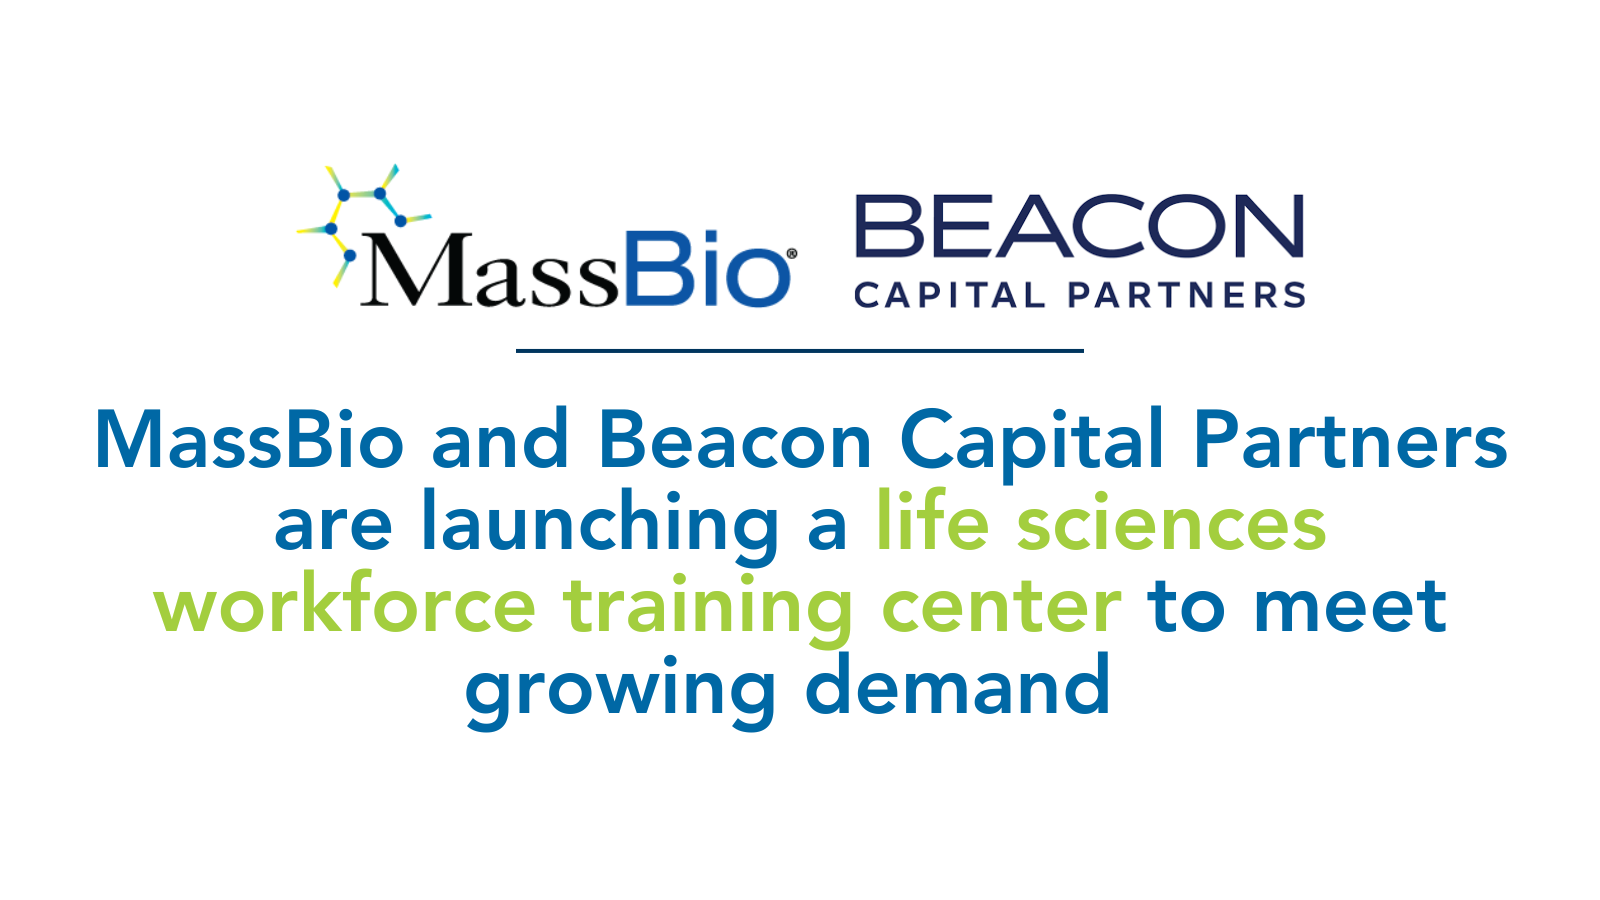 MassBio and Beacon Capital Partners are launching a life sciences workforce training center to meet growing demand